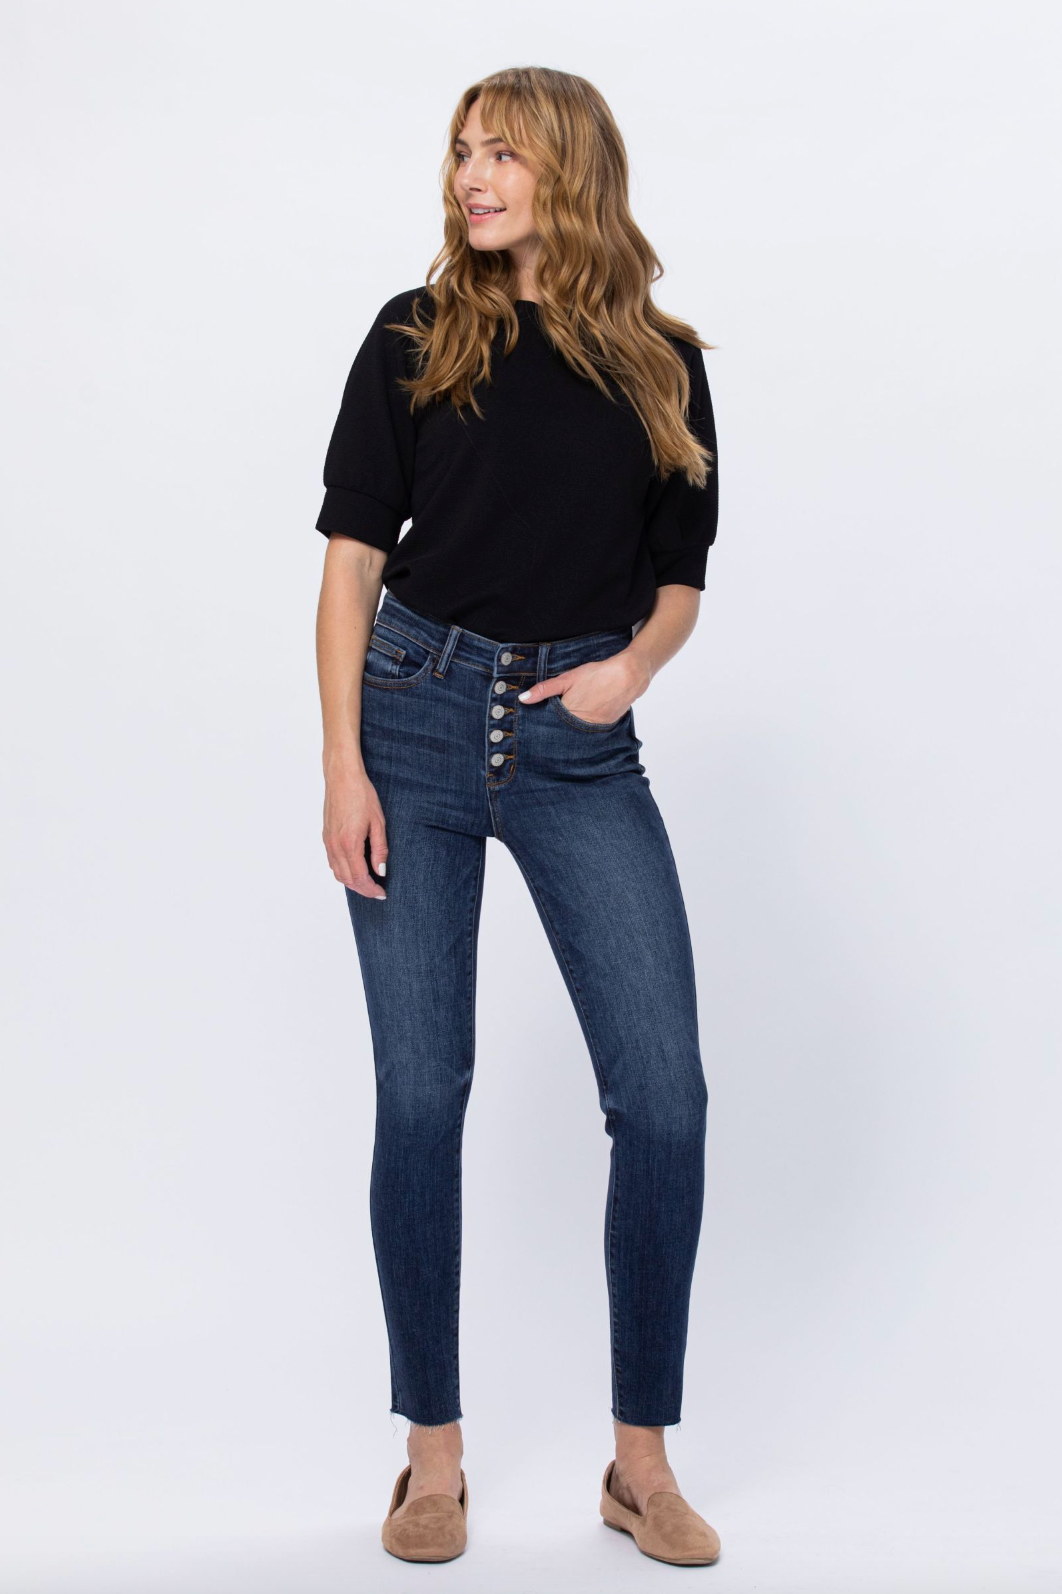 Judy Blue Button Fly Cut Off Jeans